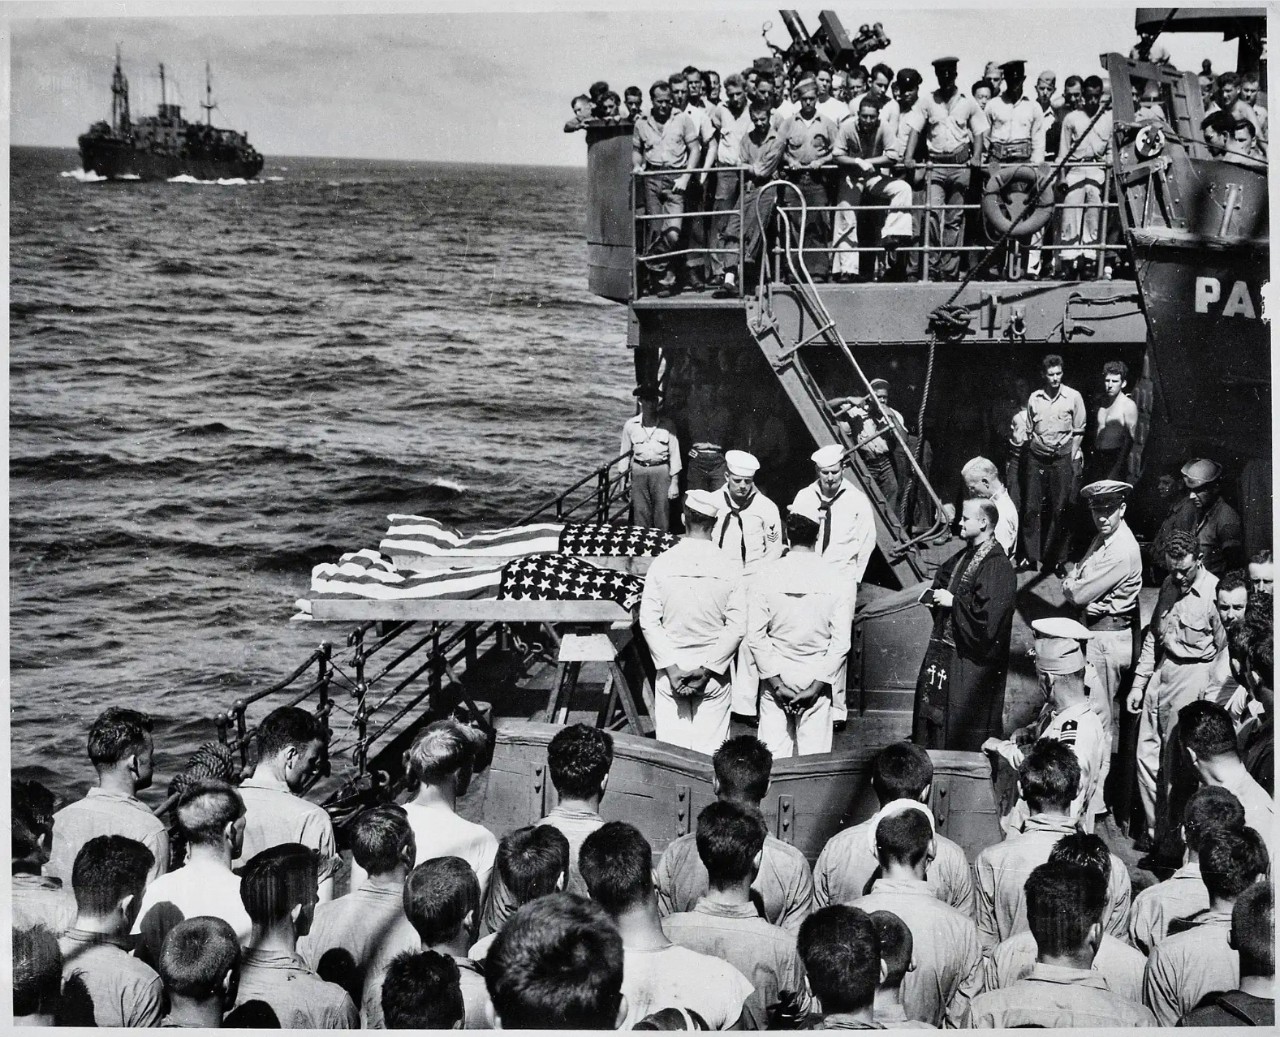 Black and white images showing two flag-draped coffins about to be consigned to the deep with a large crowd of sailors looking on.